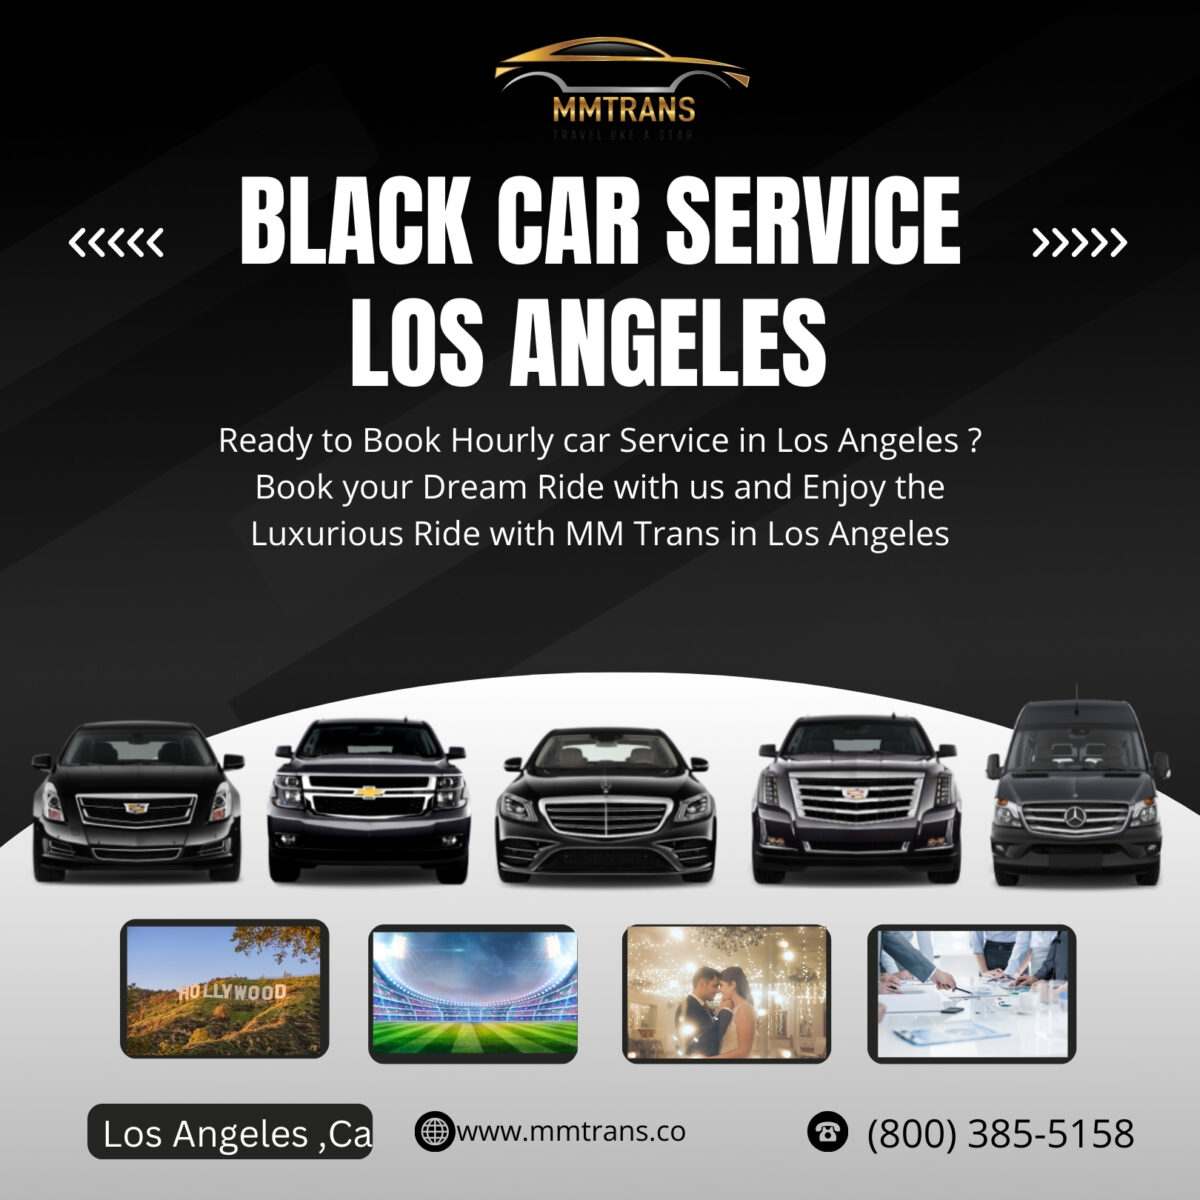 How to Easily Book LAX Limo Service with MM Trans in Under 5 Minutes